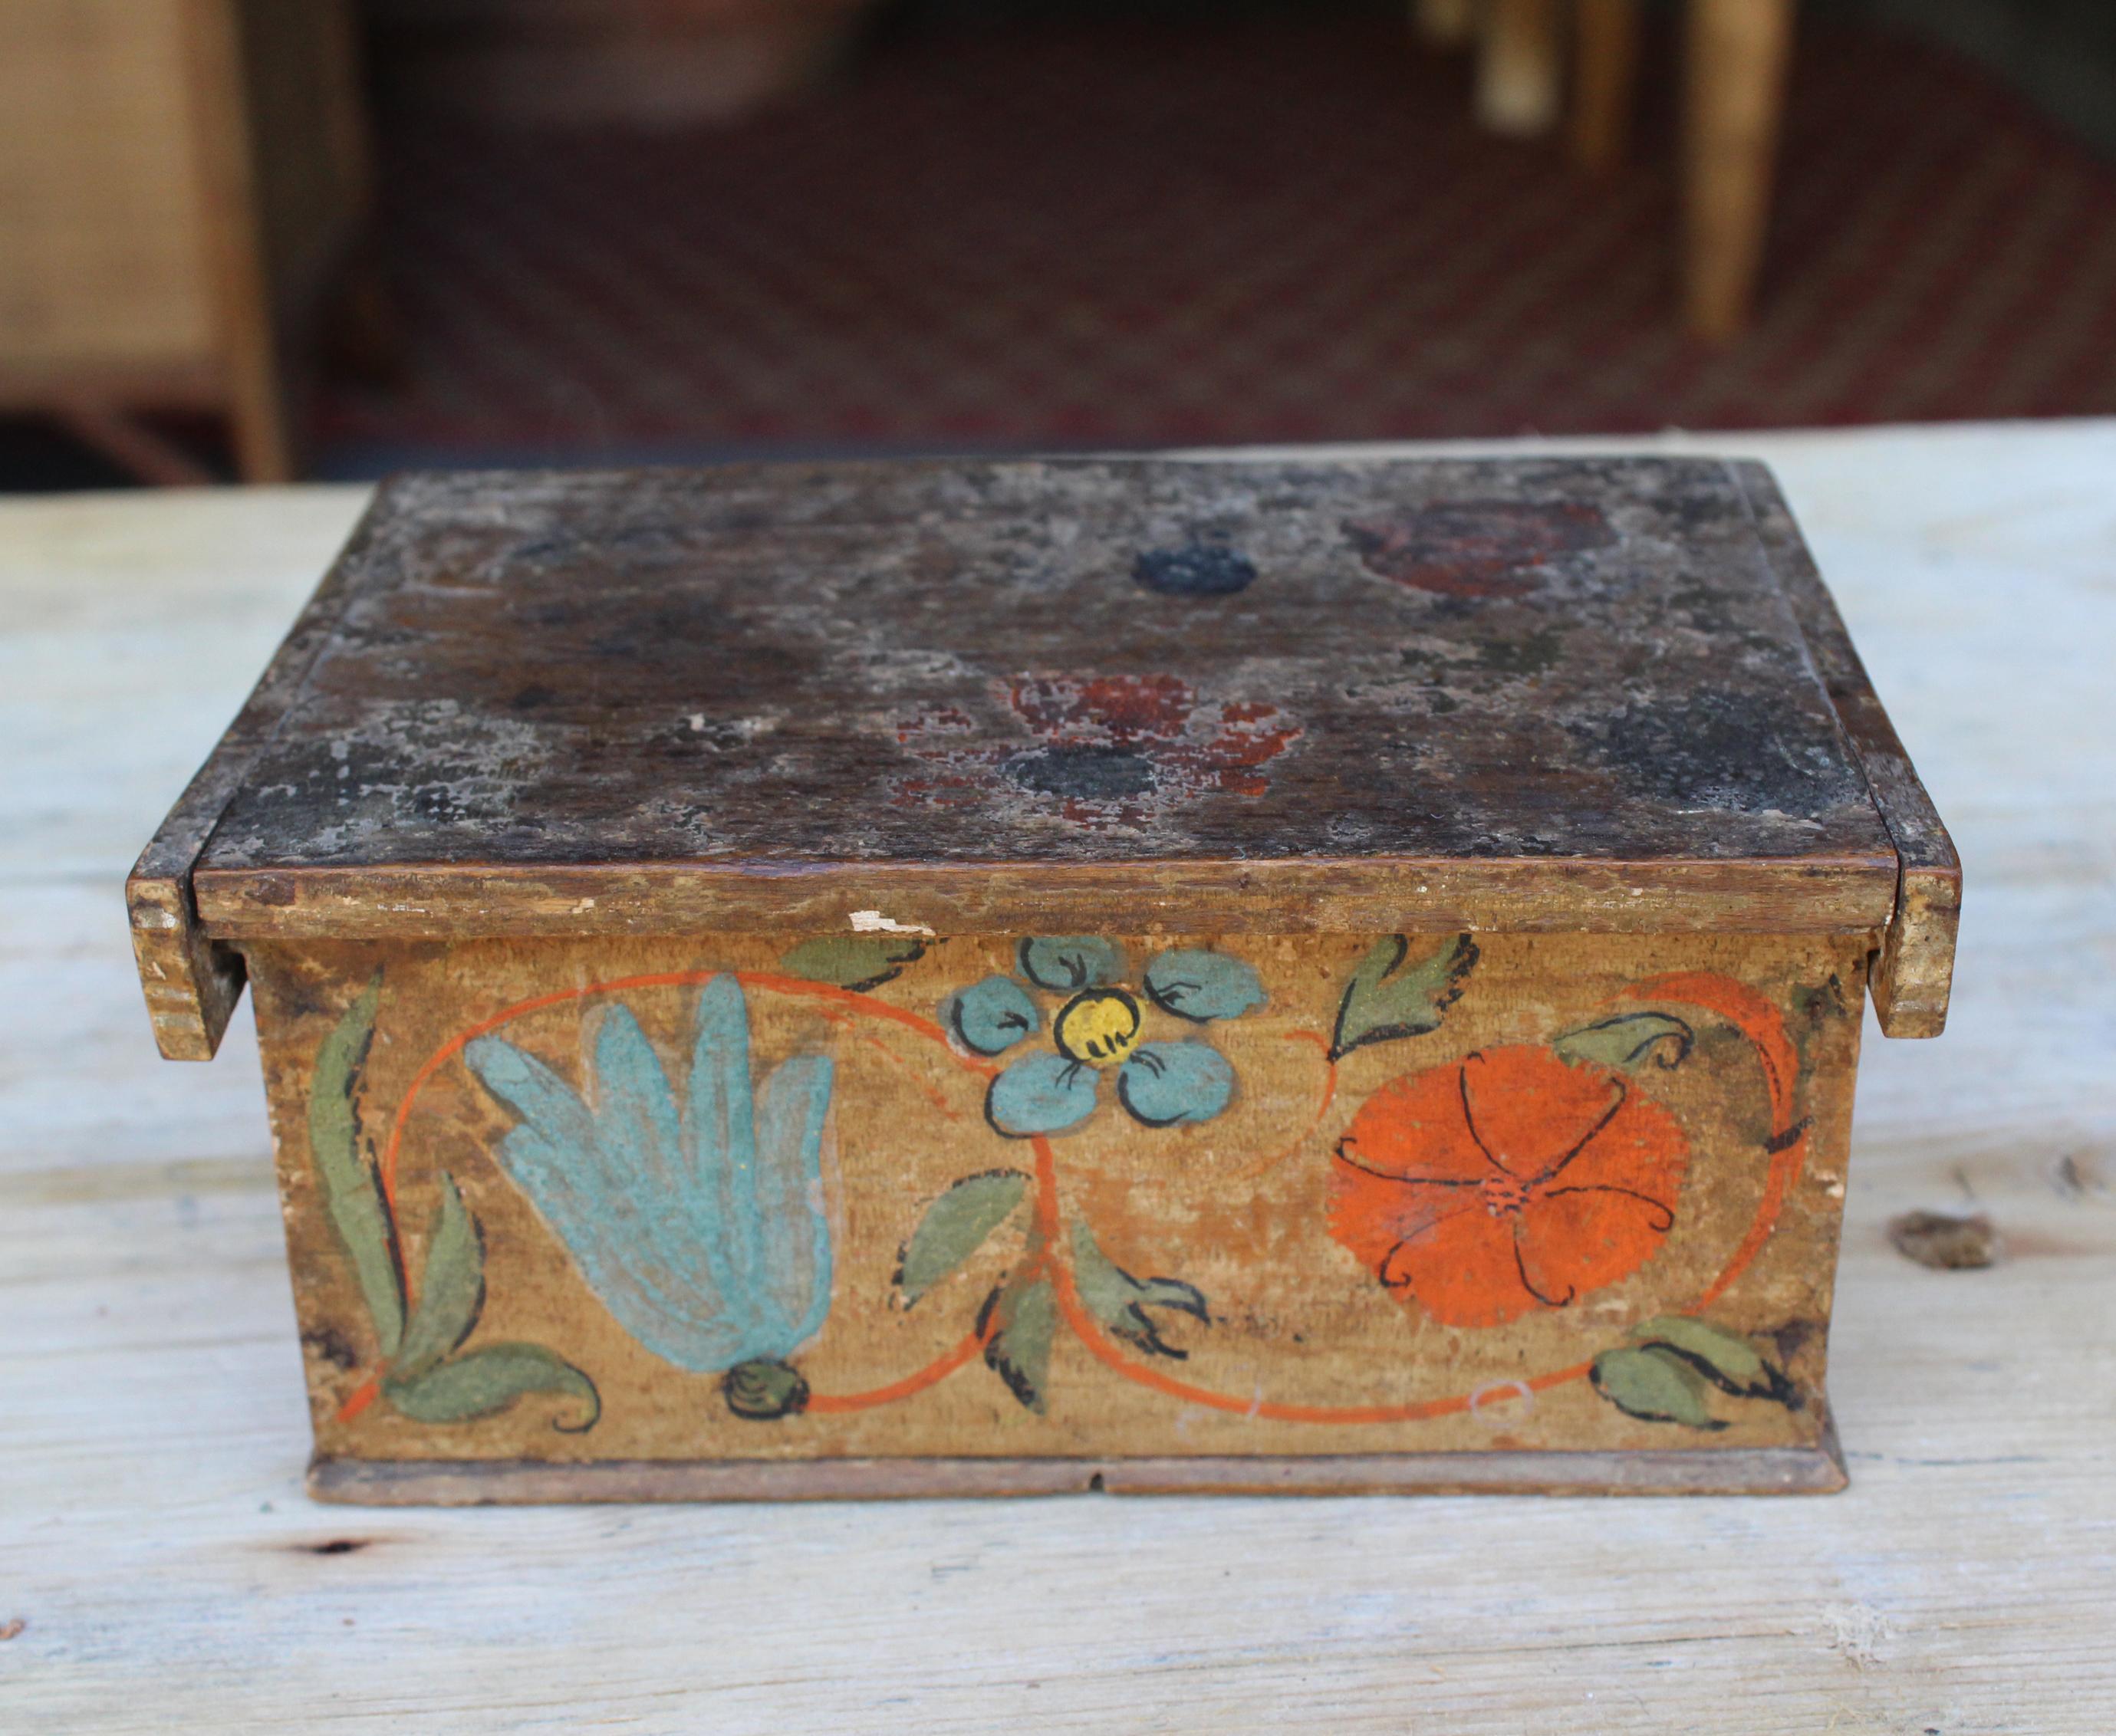 Late 18th century northern Switzerland wooden box with hand painted vegetable motifs.